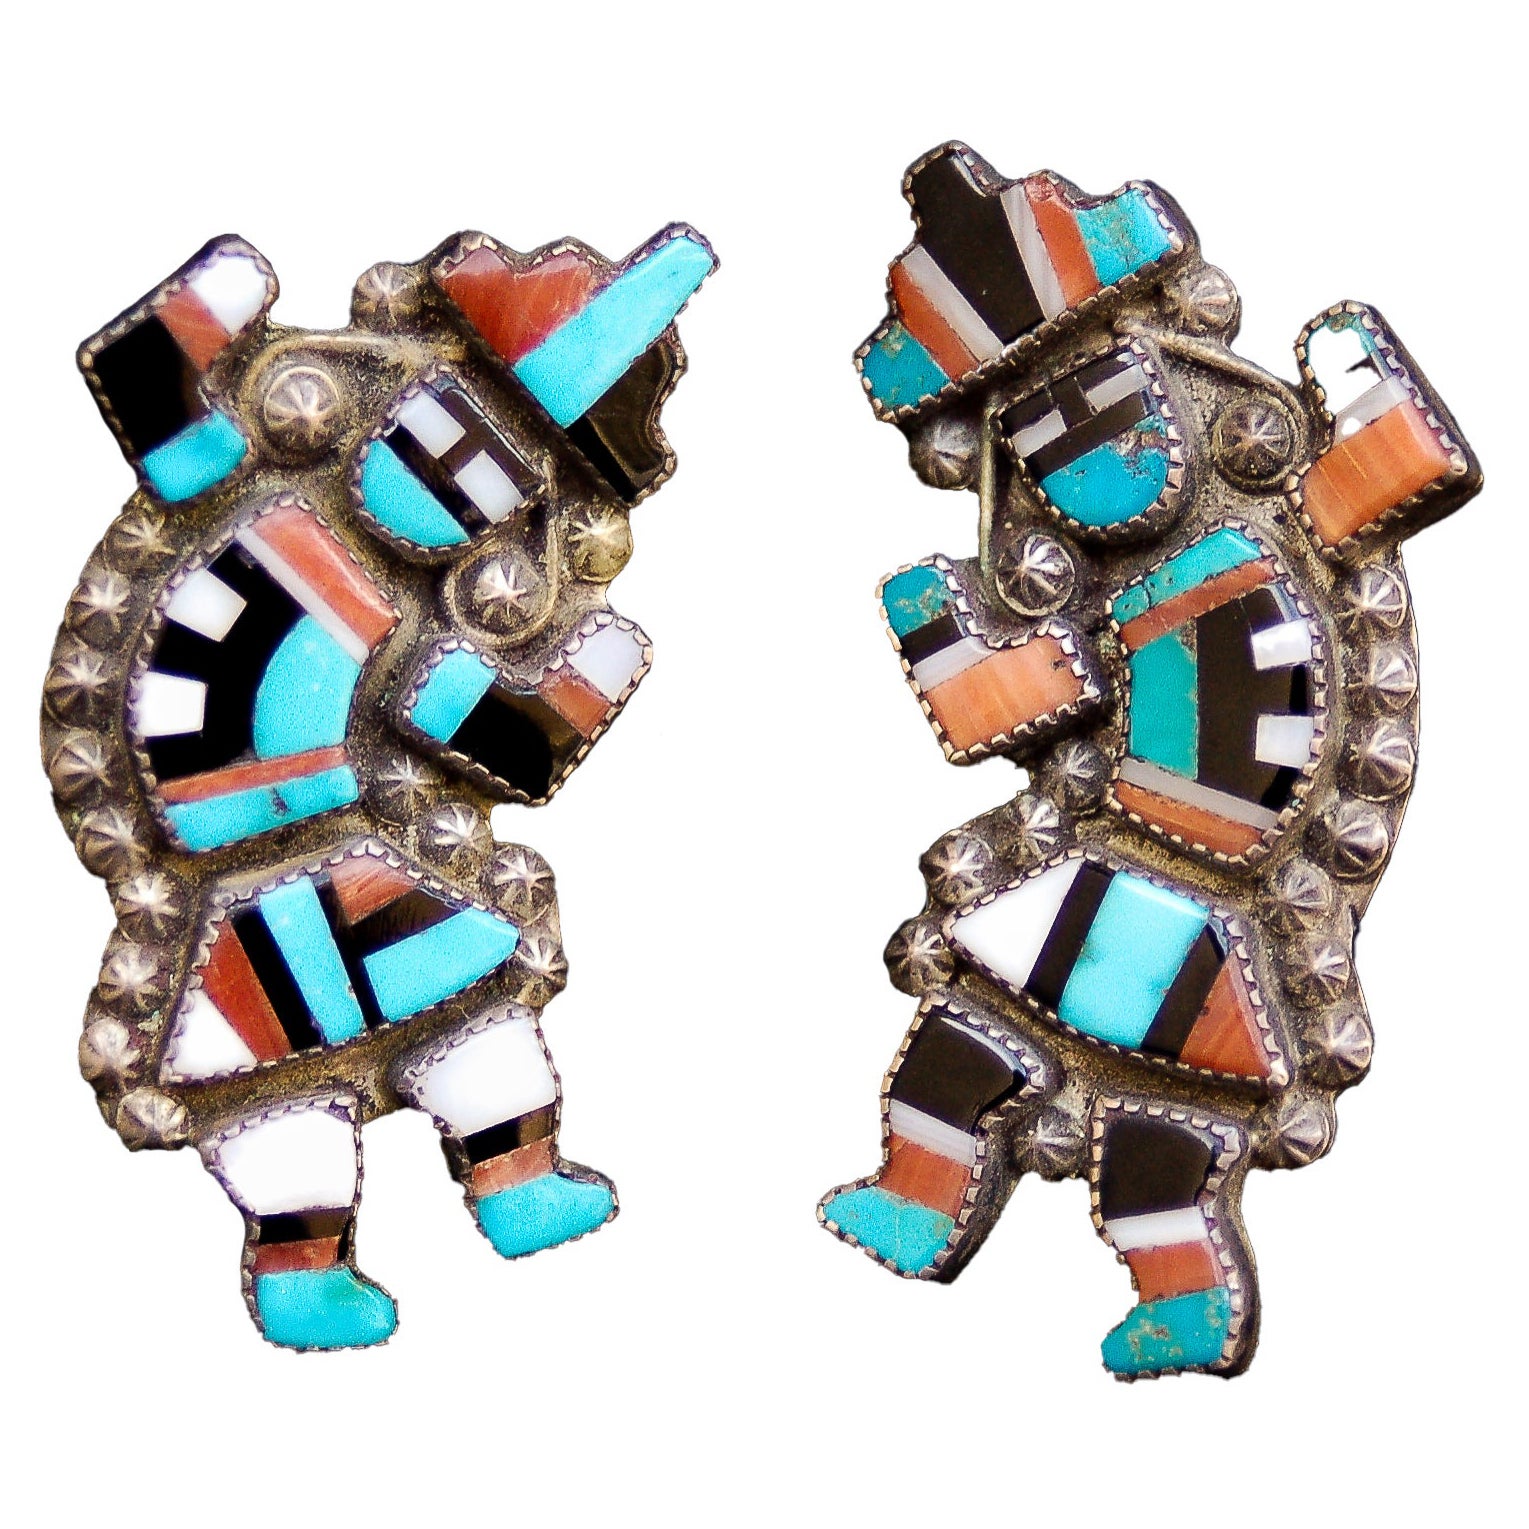 Classic and Rare Small Matched Pair of Zuni Rainbow Dancer Pins by Merle Edaakie